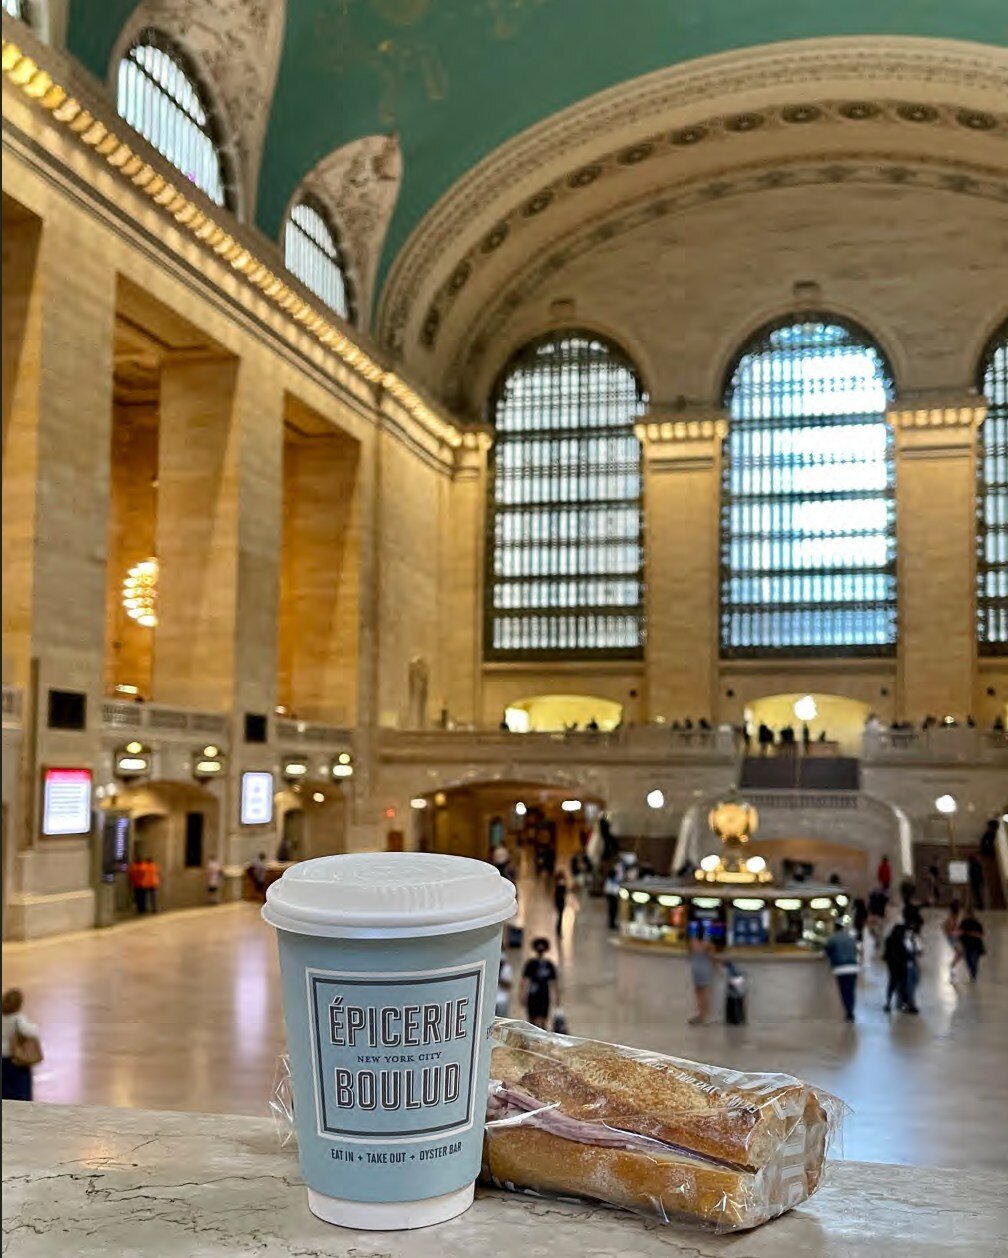 Stop by for coffee and a jambon beurre on your commute through Grand Central.